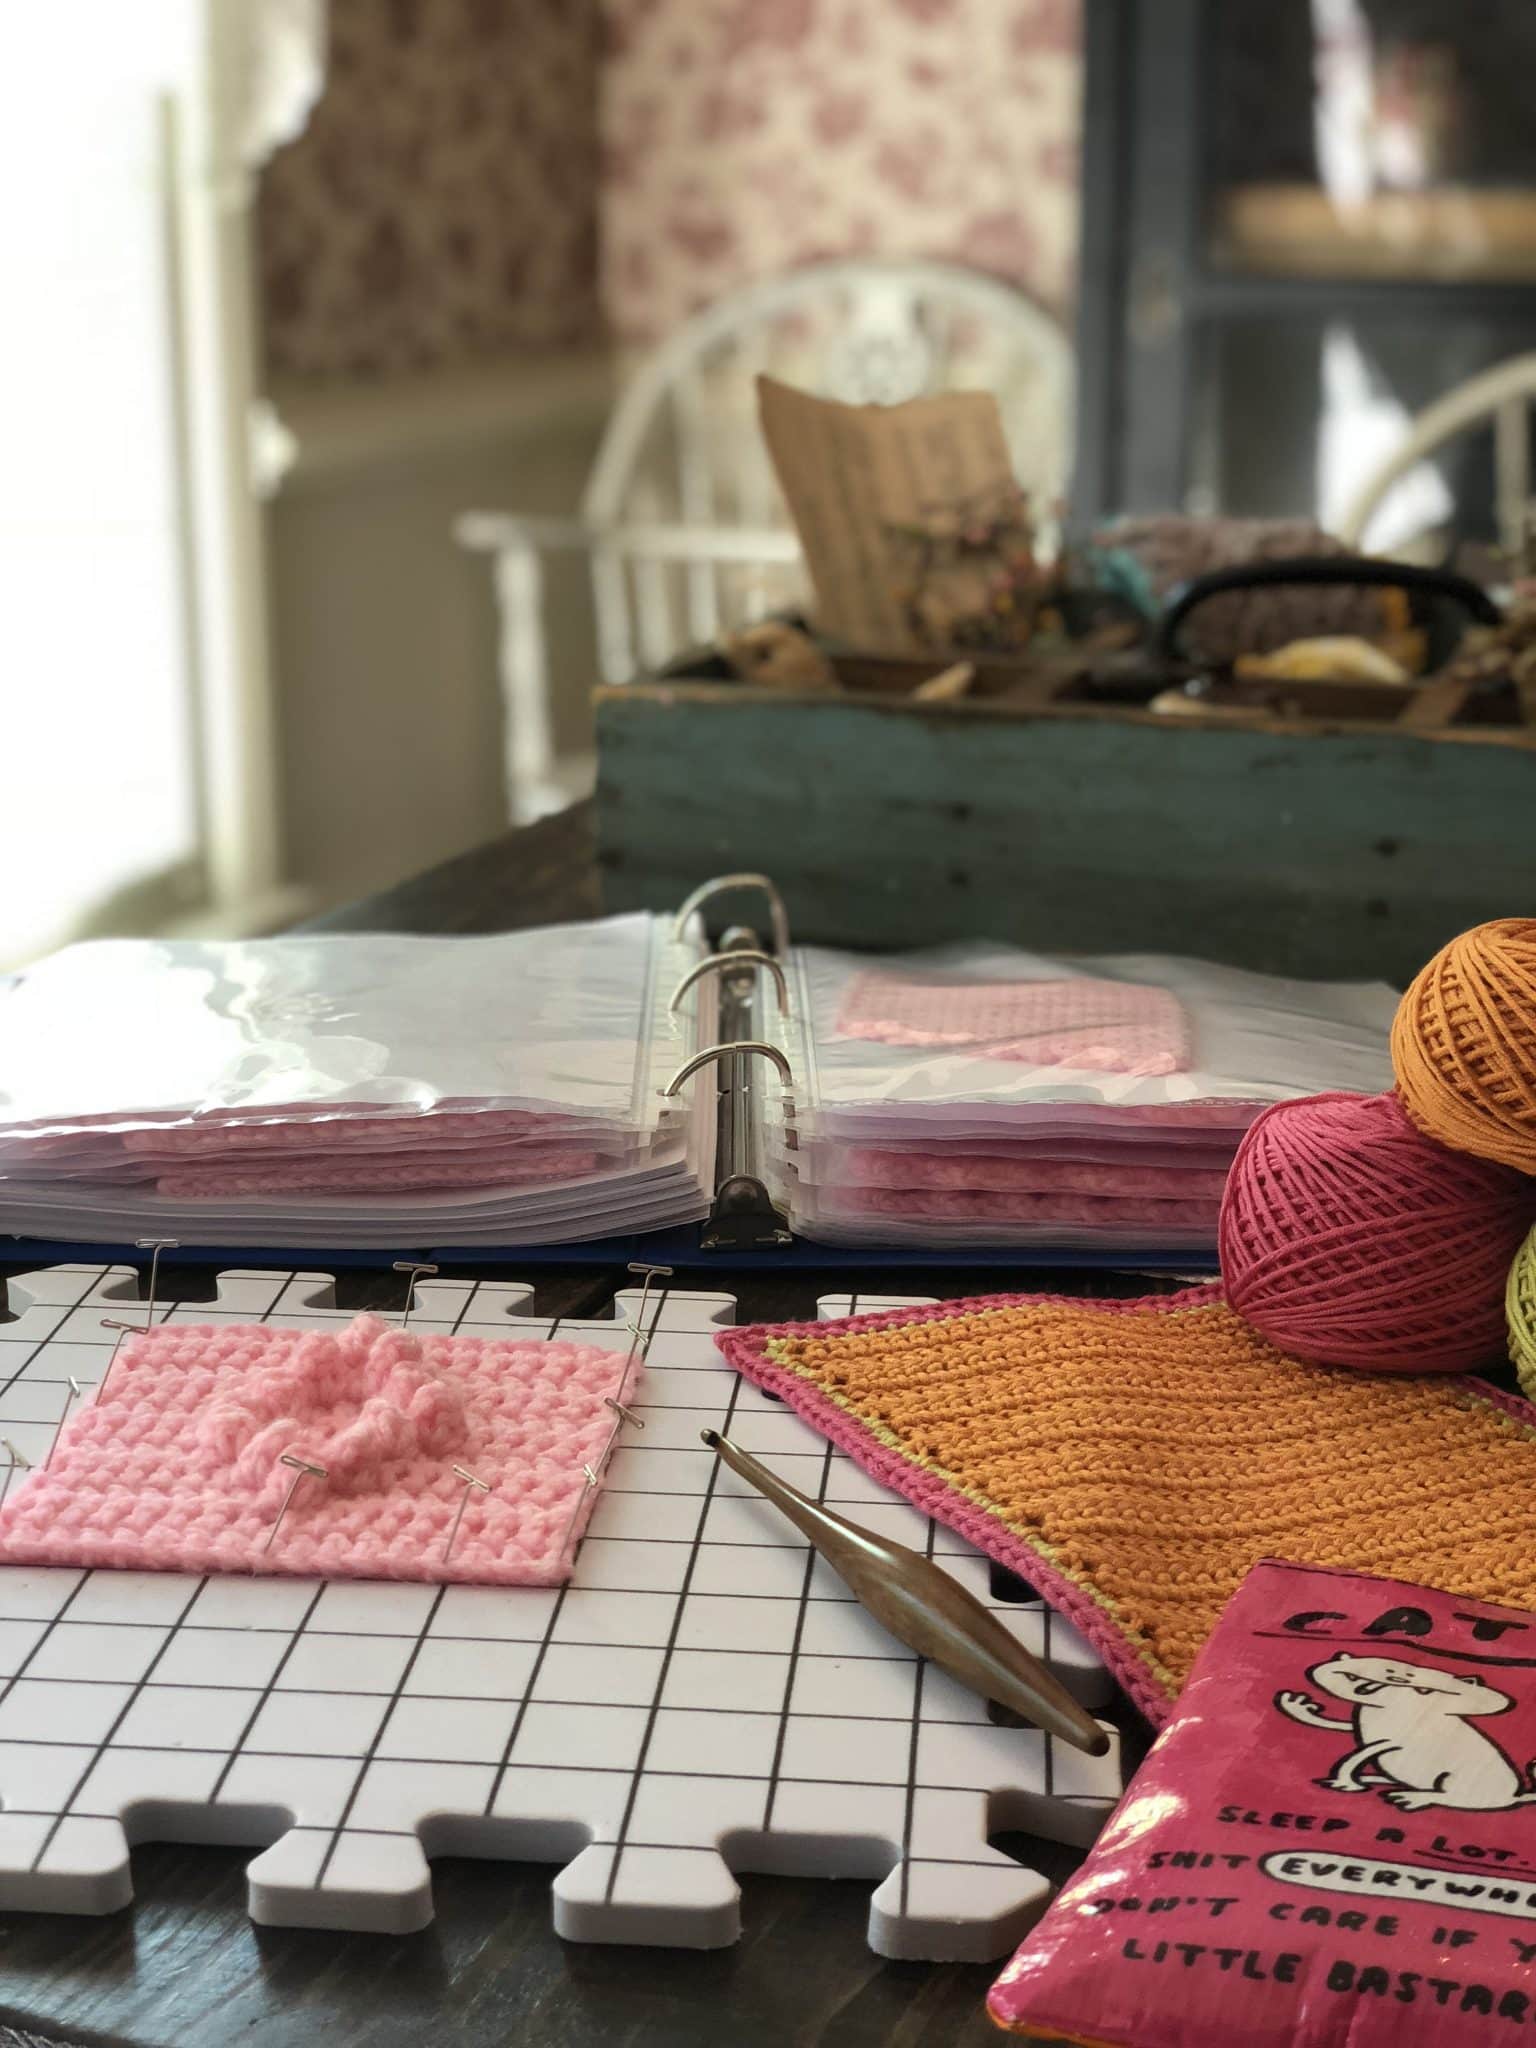 Certified Crochet Instructor program from the Craft Yarn Council. 